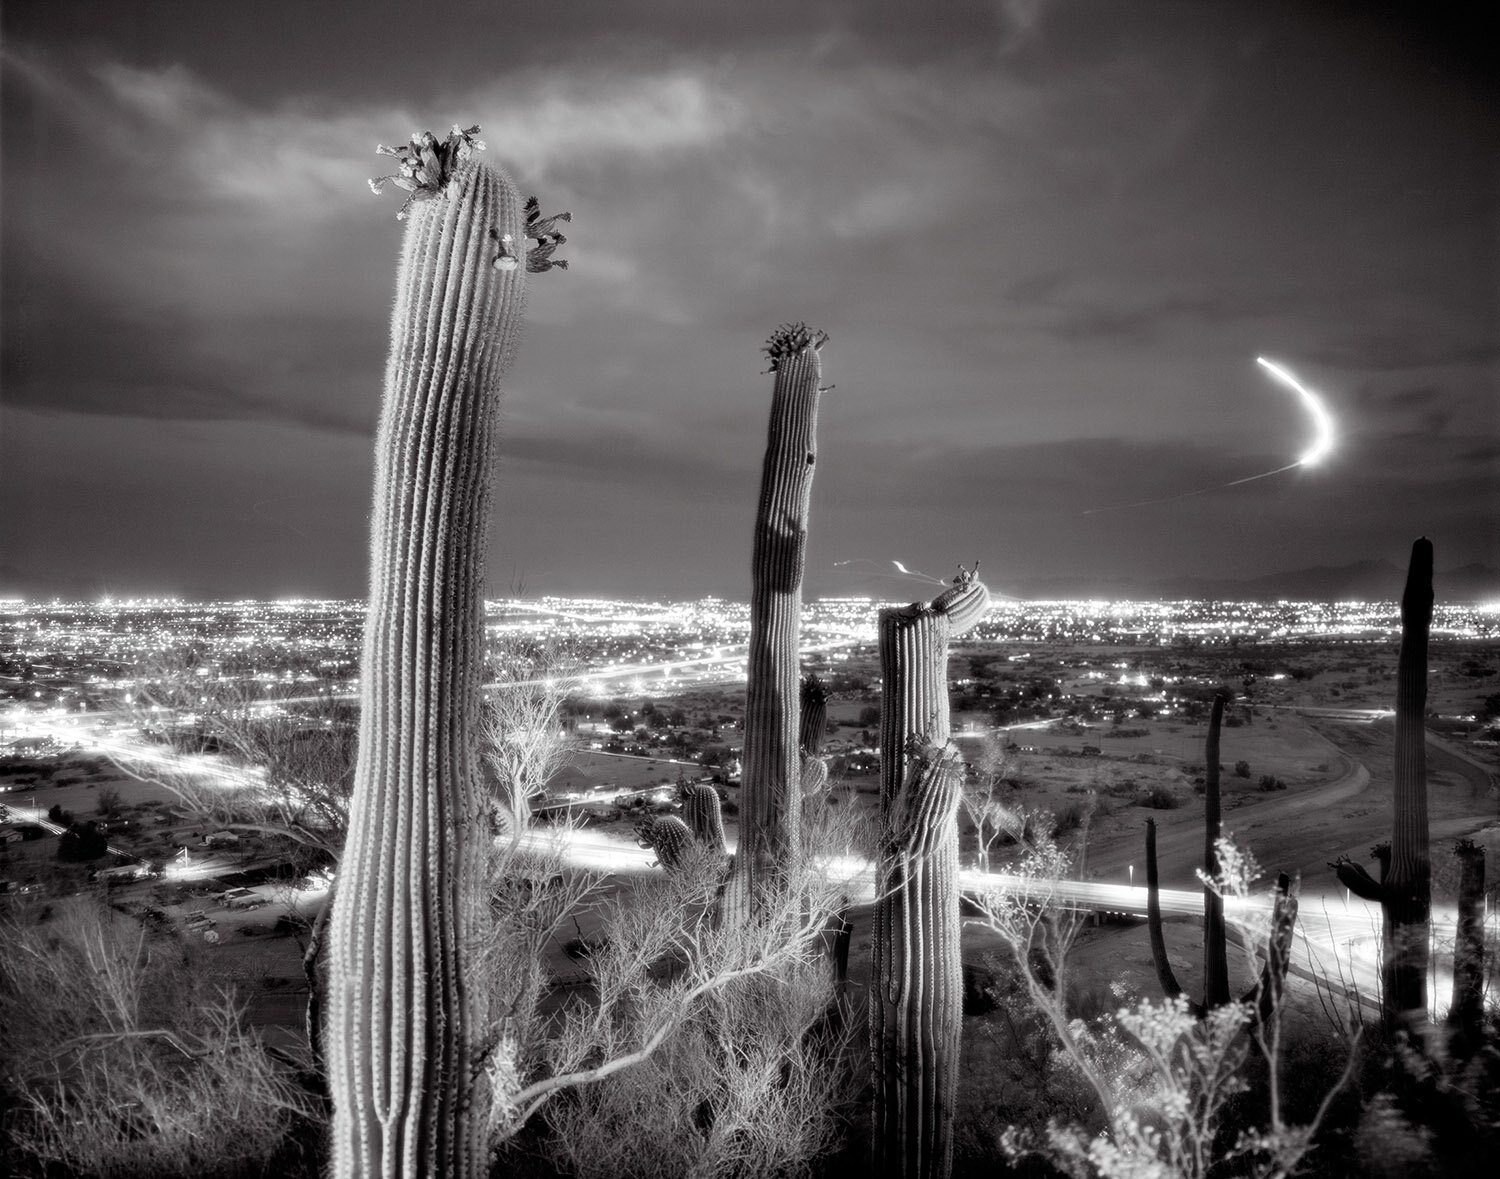 Saguaros and Police Helicopter, view of Tucson from A-Mountain, b/w version